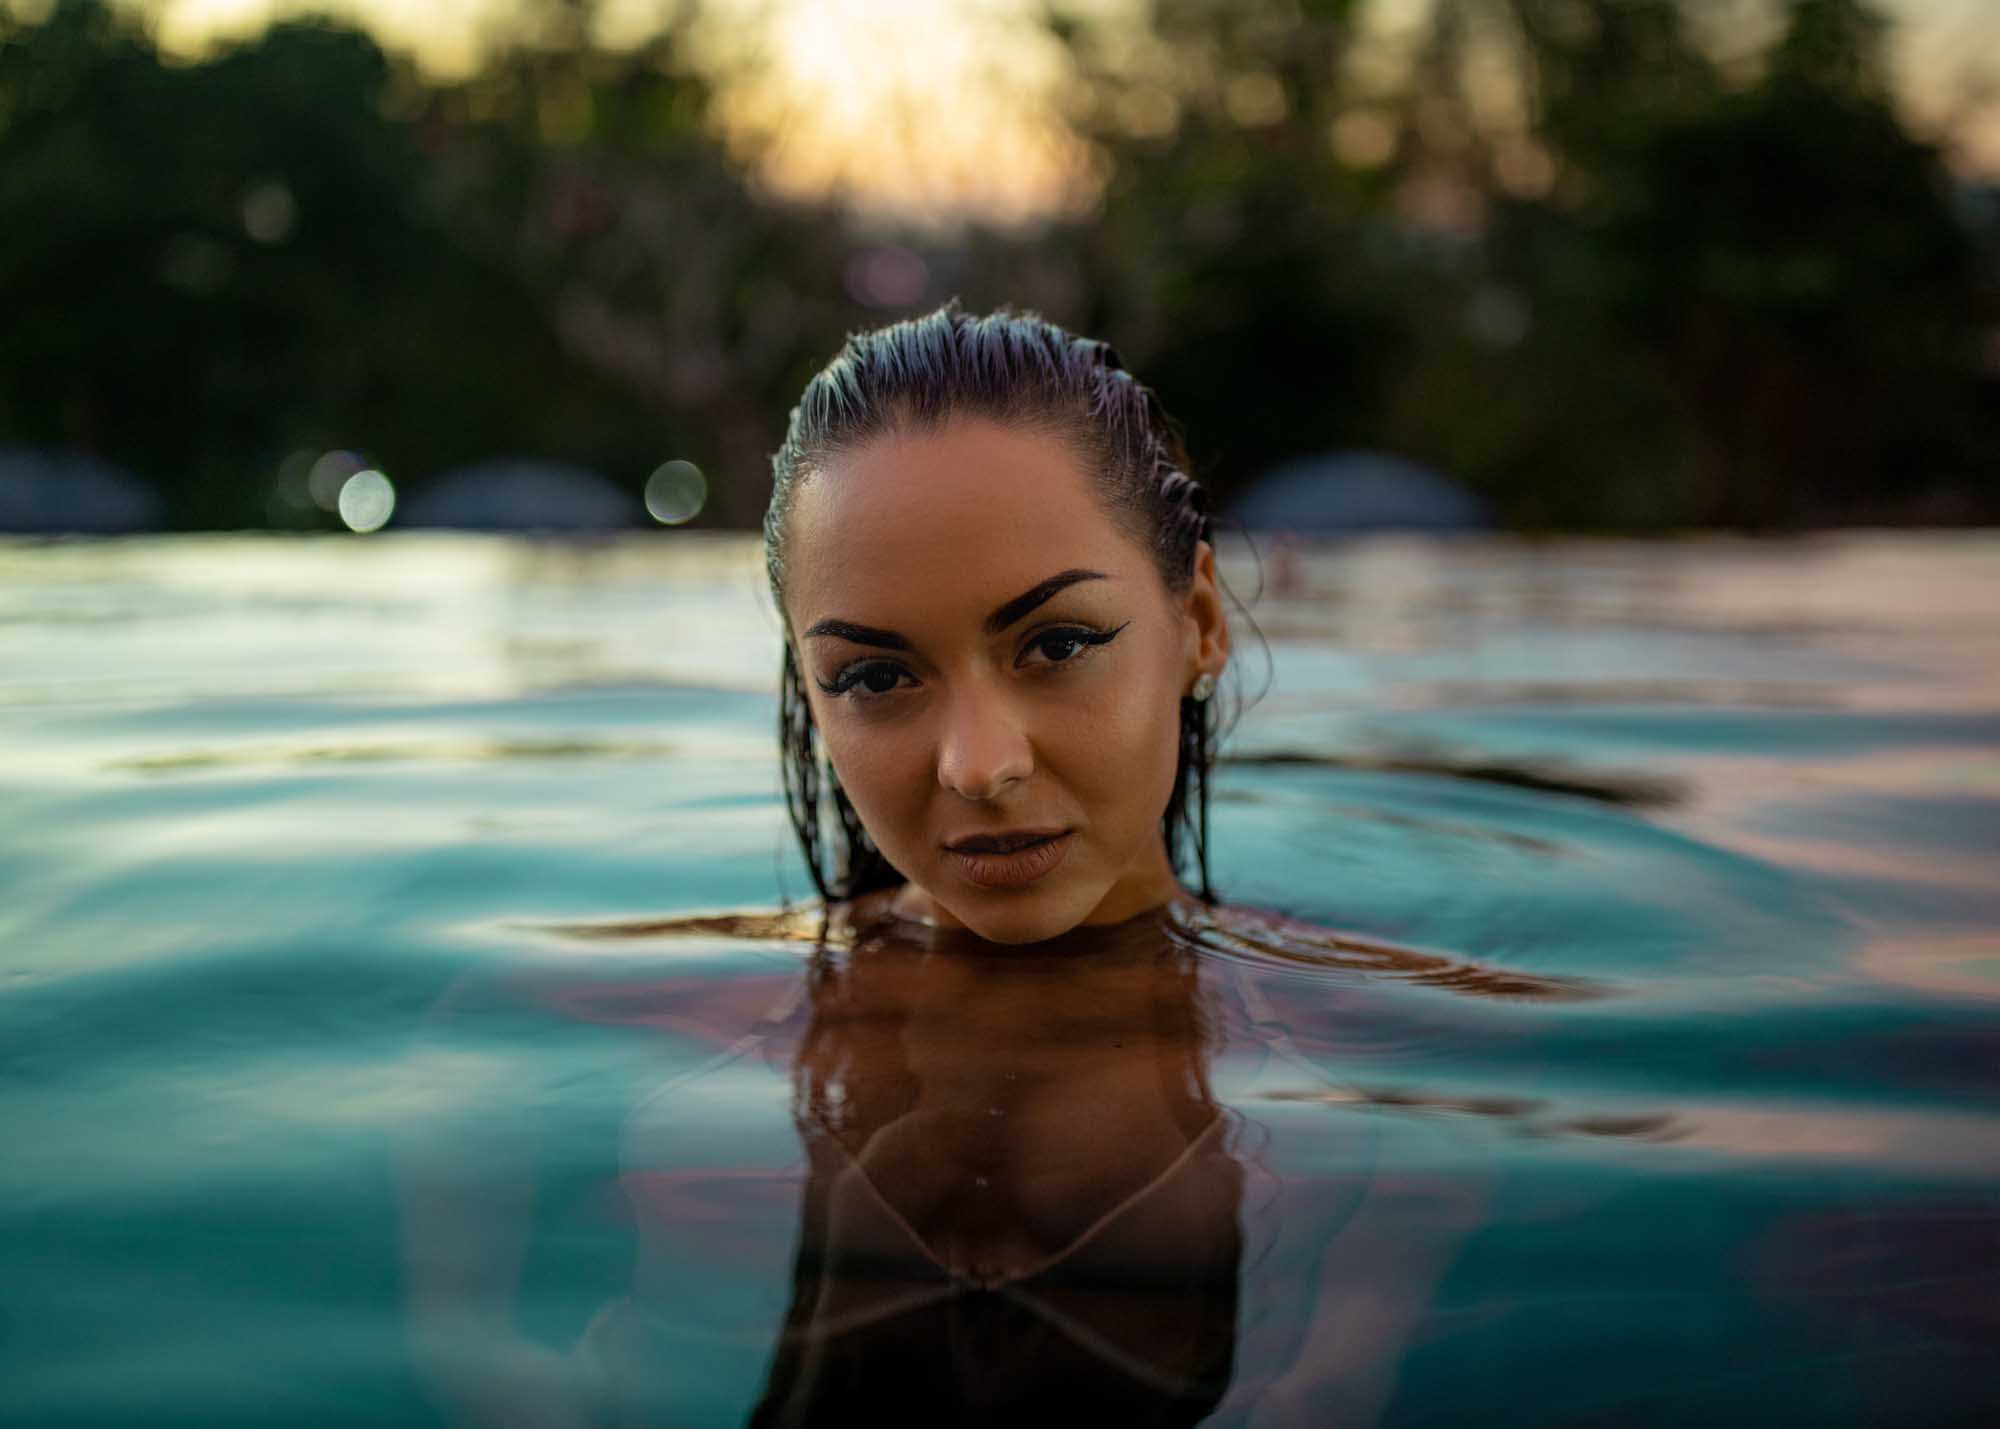 Hungarian Model Enciss in infinity pool at sunset | Krabi, Thailand | Travel Photography | Fashion Photography | Swimsuit Photography